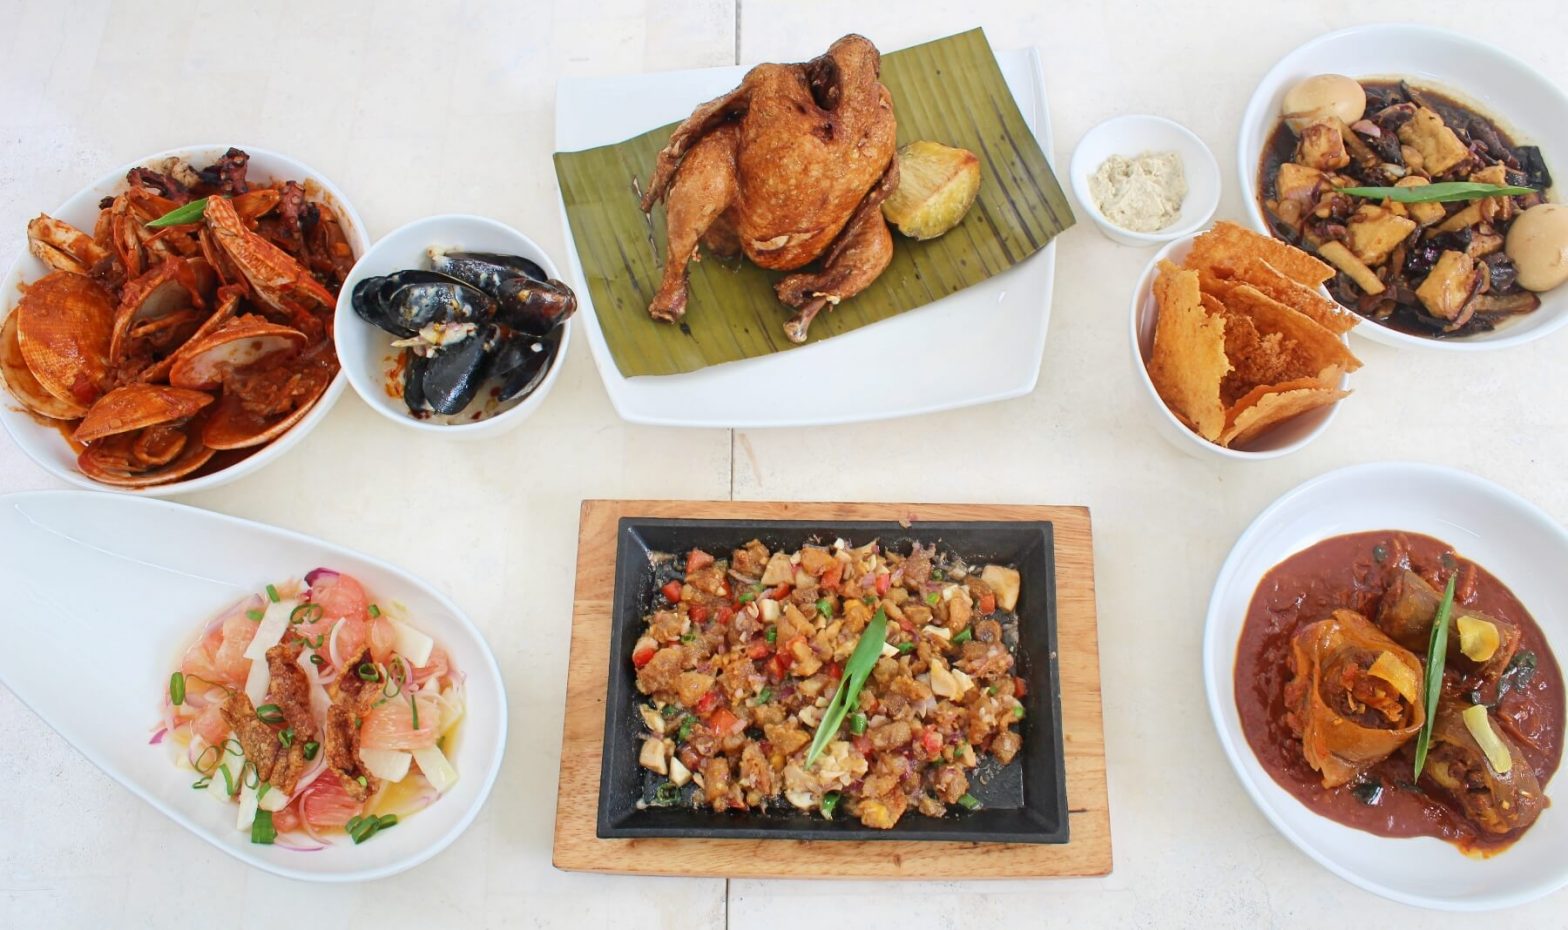 Golden Cowrie Filipino Kitchen serves fusion of traditional, creative Pinoy food flavors